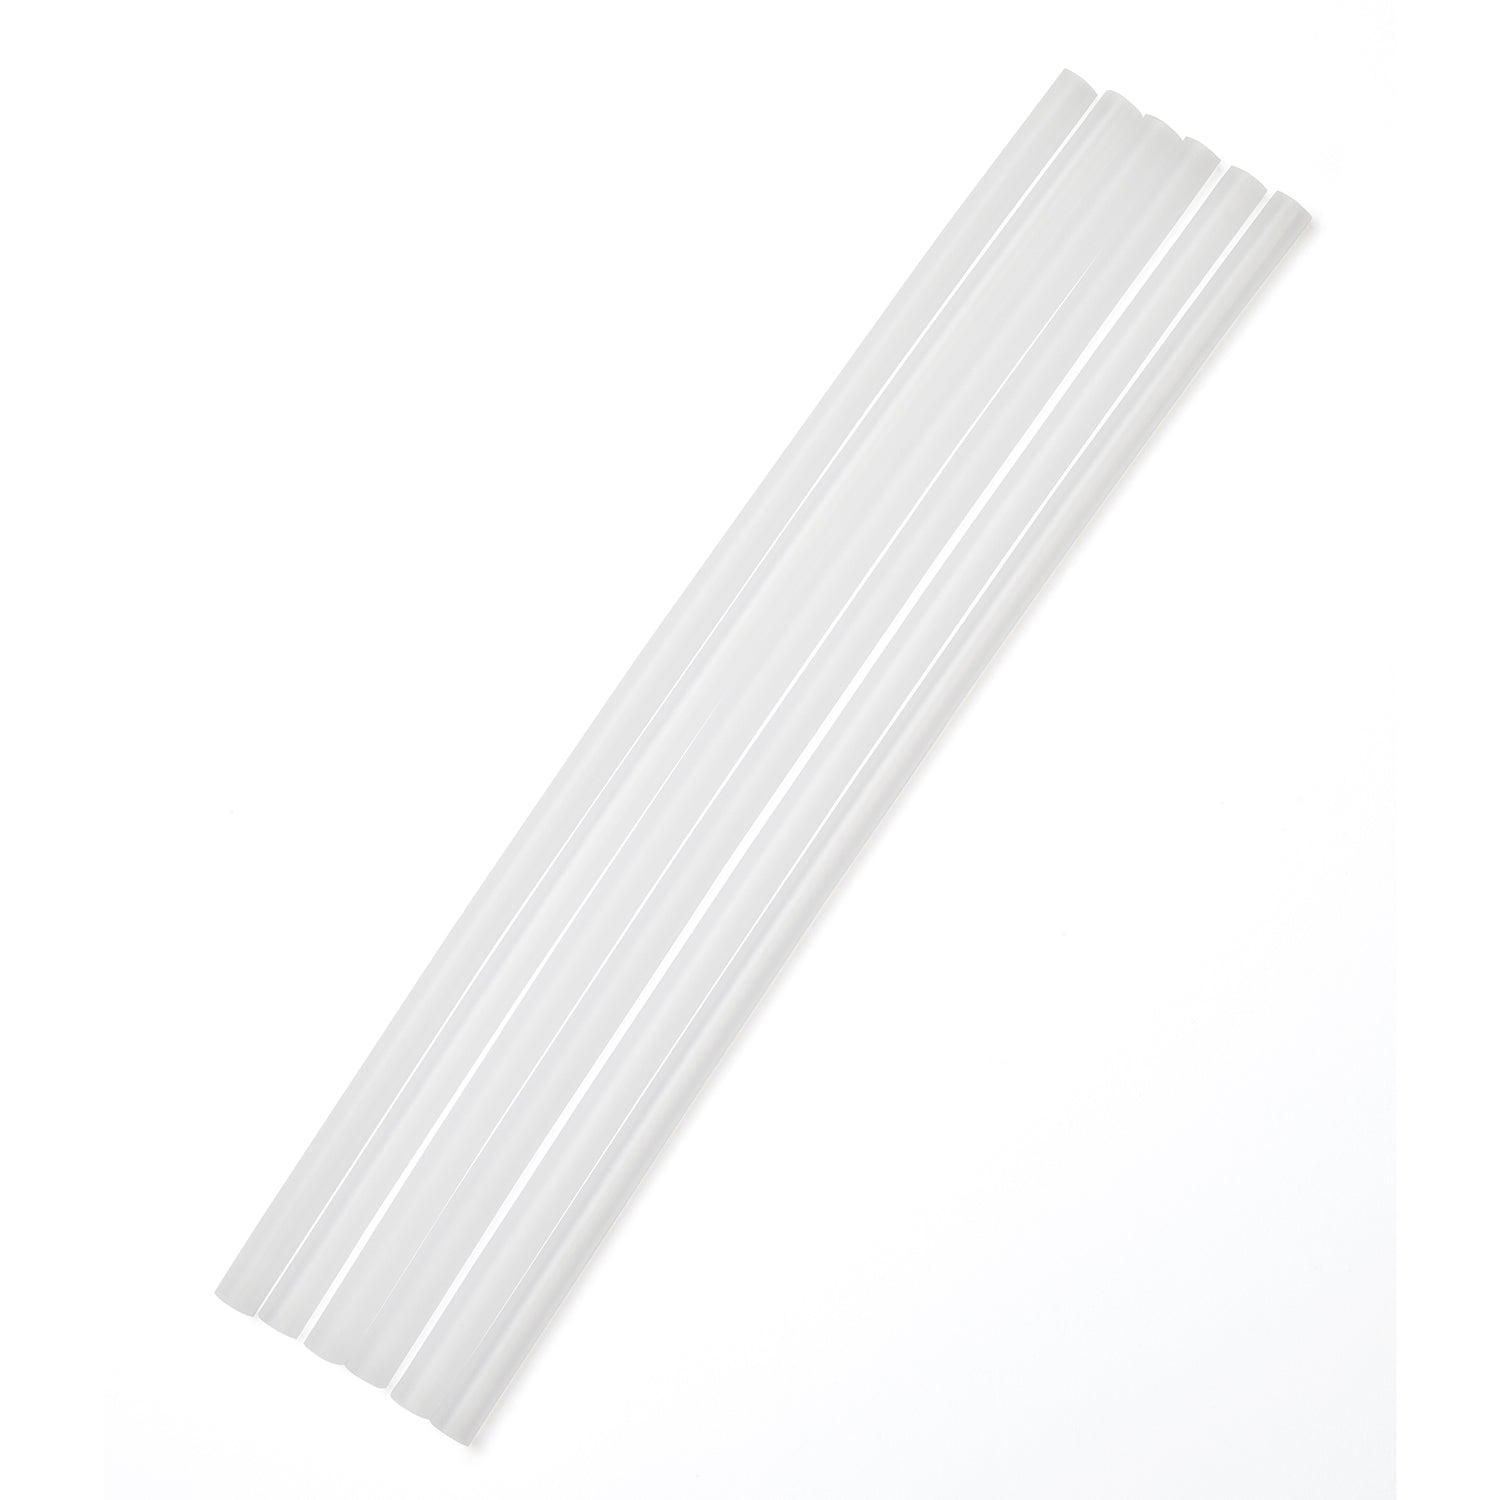 Replacement Straws (6-Pack) for Straw Cap Lid